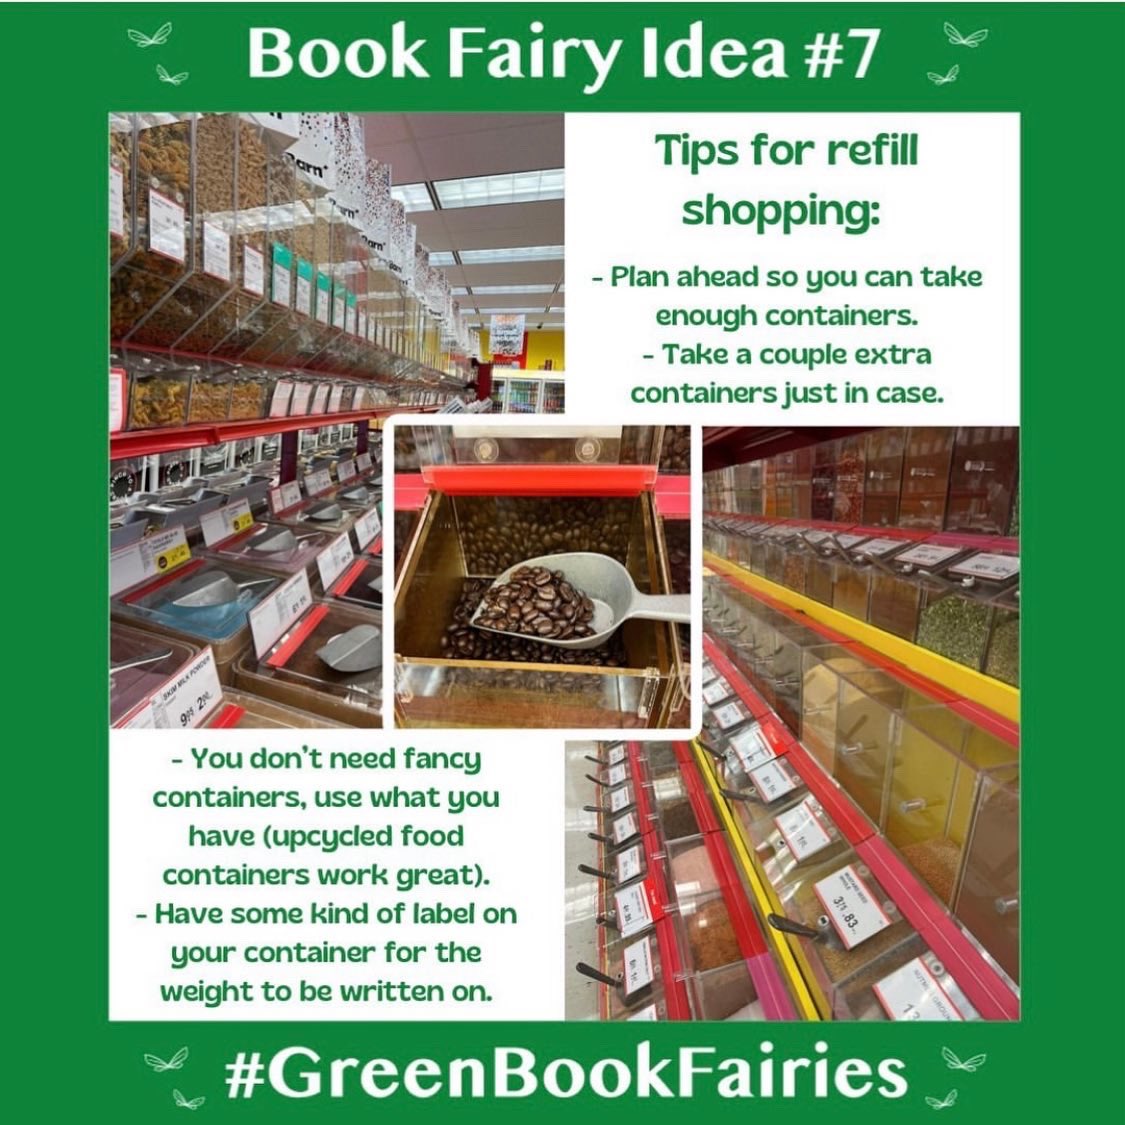 Today the #GreenBookFairies are talking about food packaging and looking for refill options!

#ibelieveinbookfairies #reducereuserecycle #reducewaste #refill #plasticfreejuly #refillshops #chooserefill #shopsmart #bulkbuy #gogreen #refillstore #refillshop #refillstores